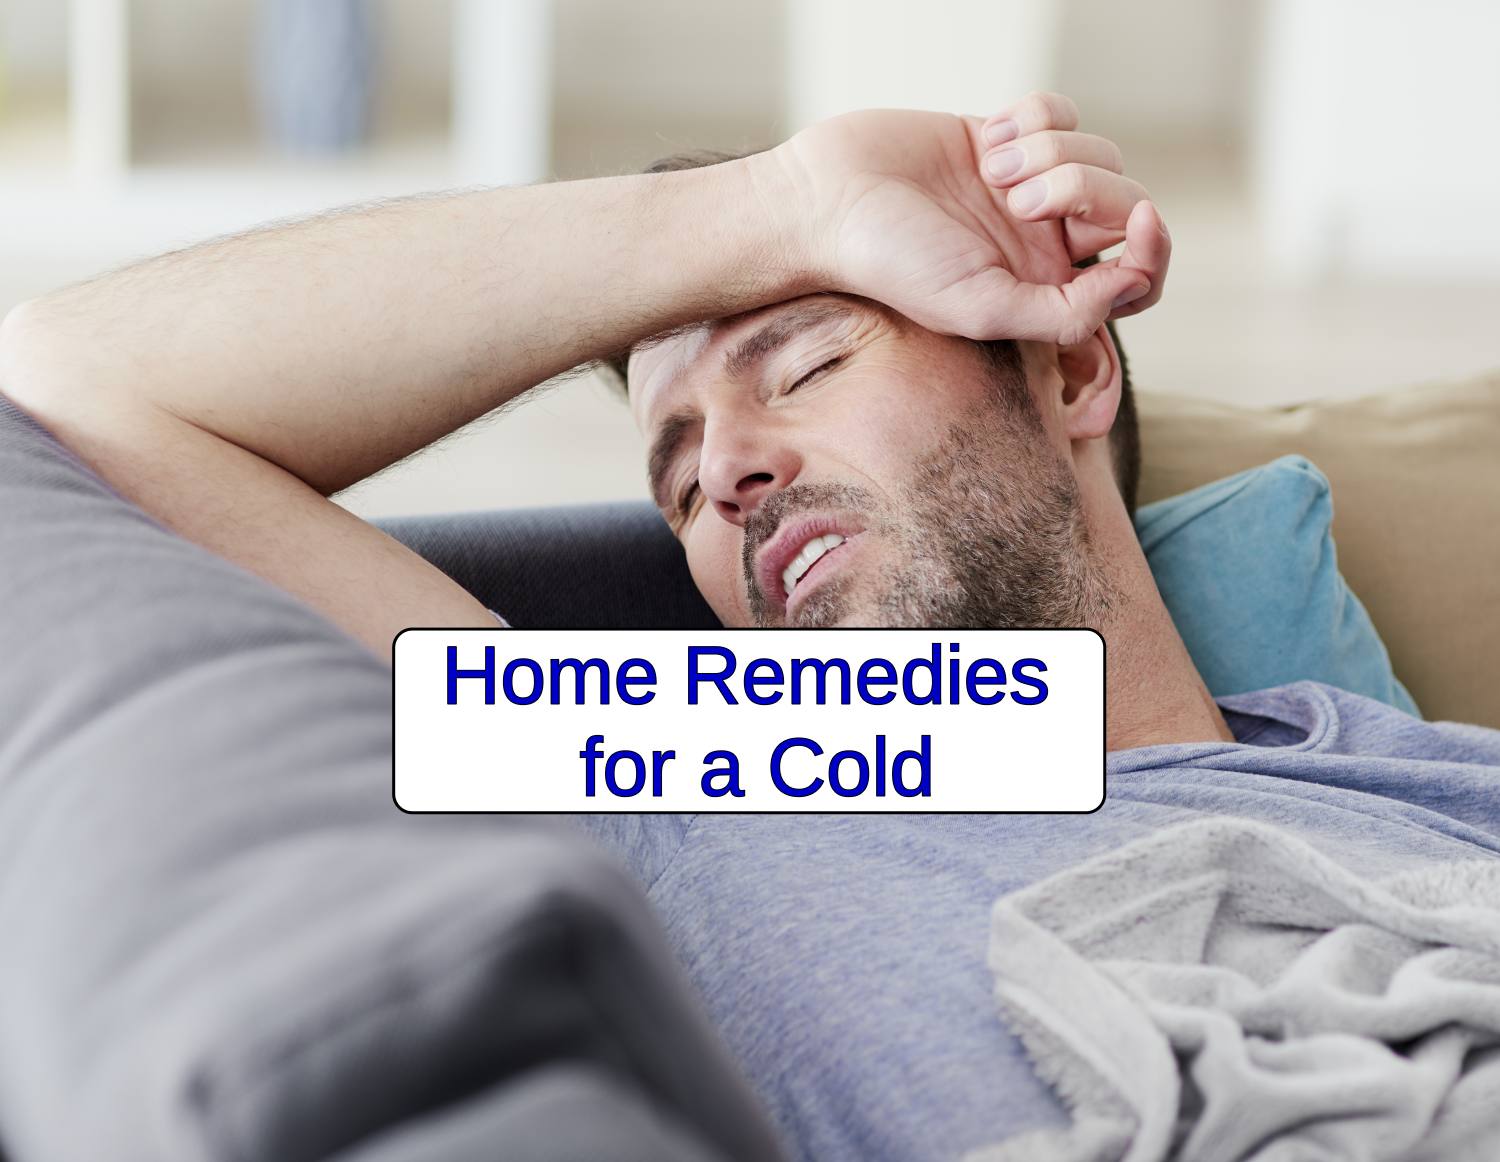 10 Home Remedies for a Cold